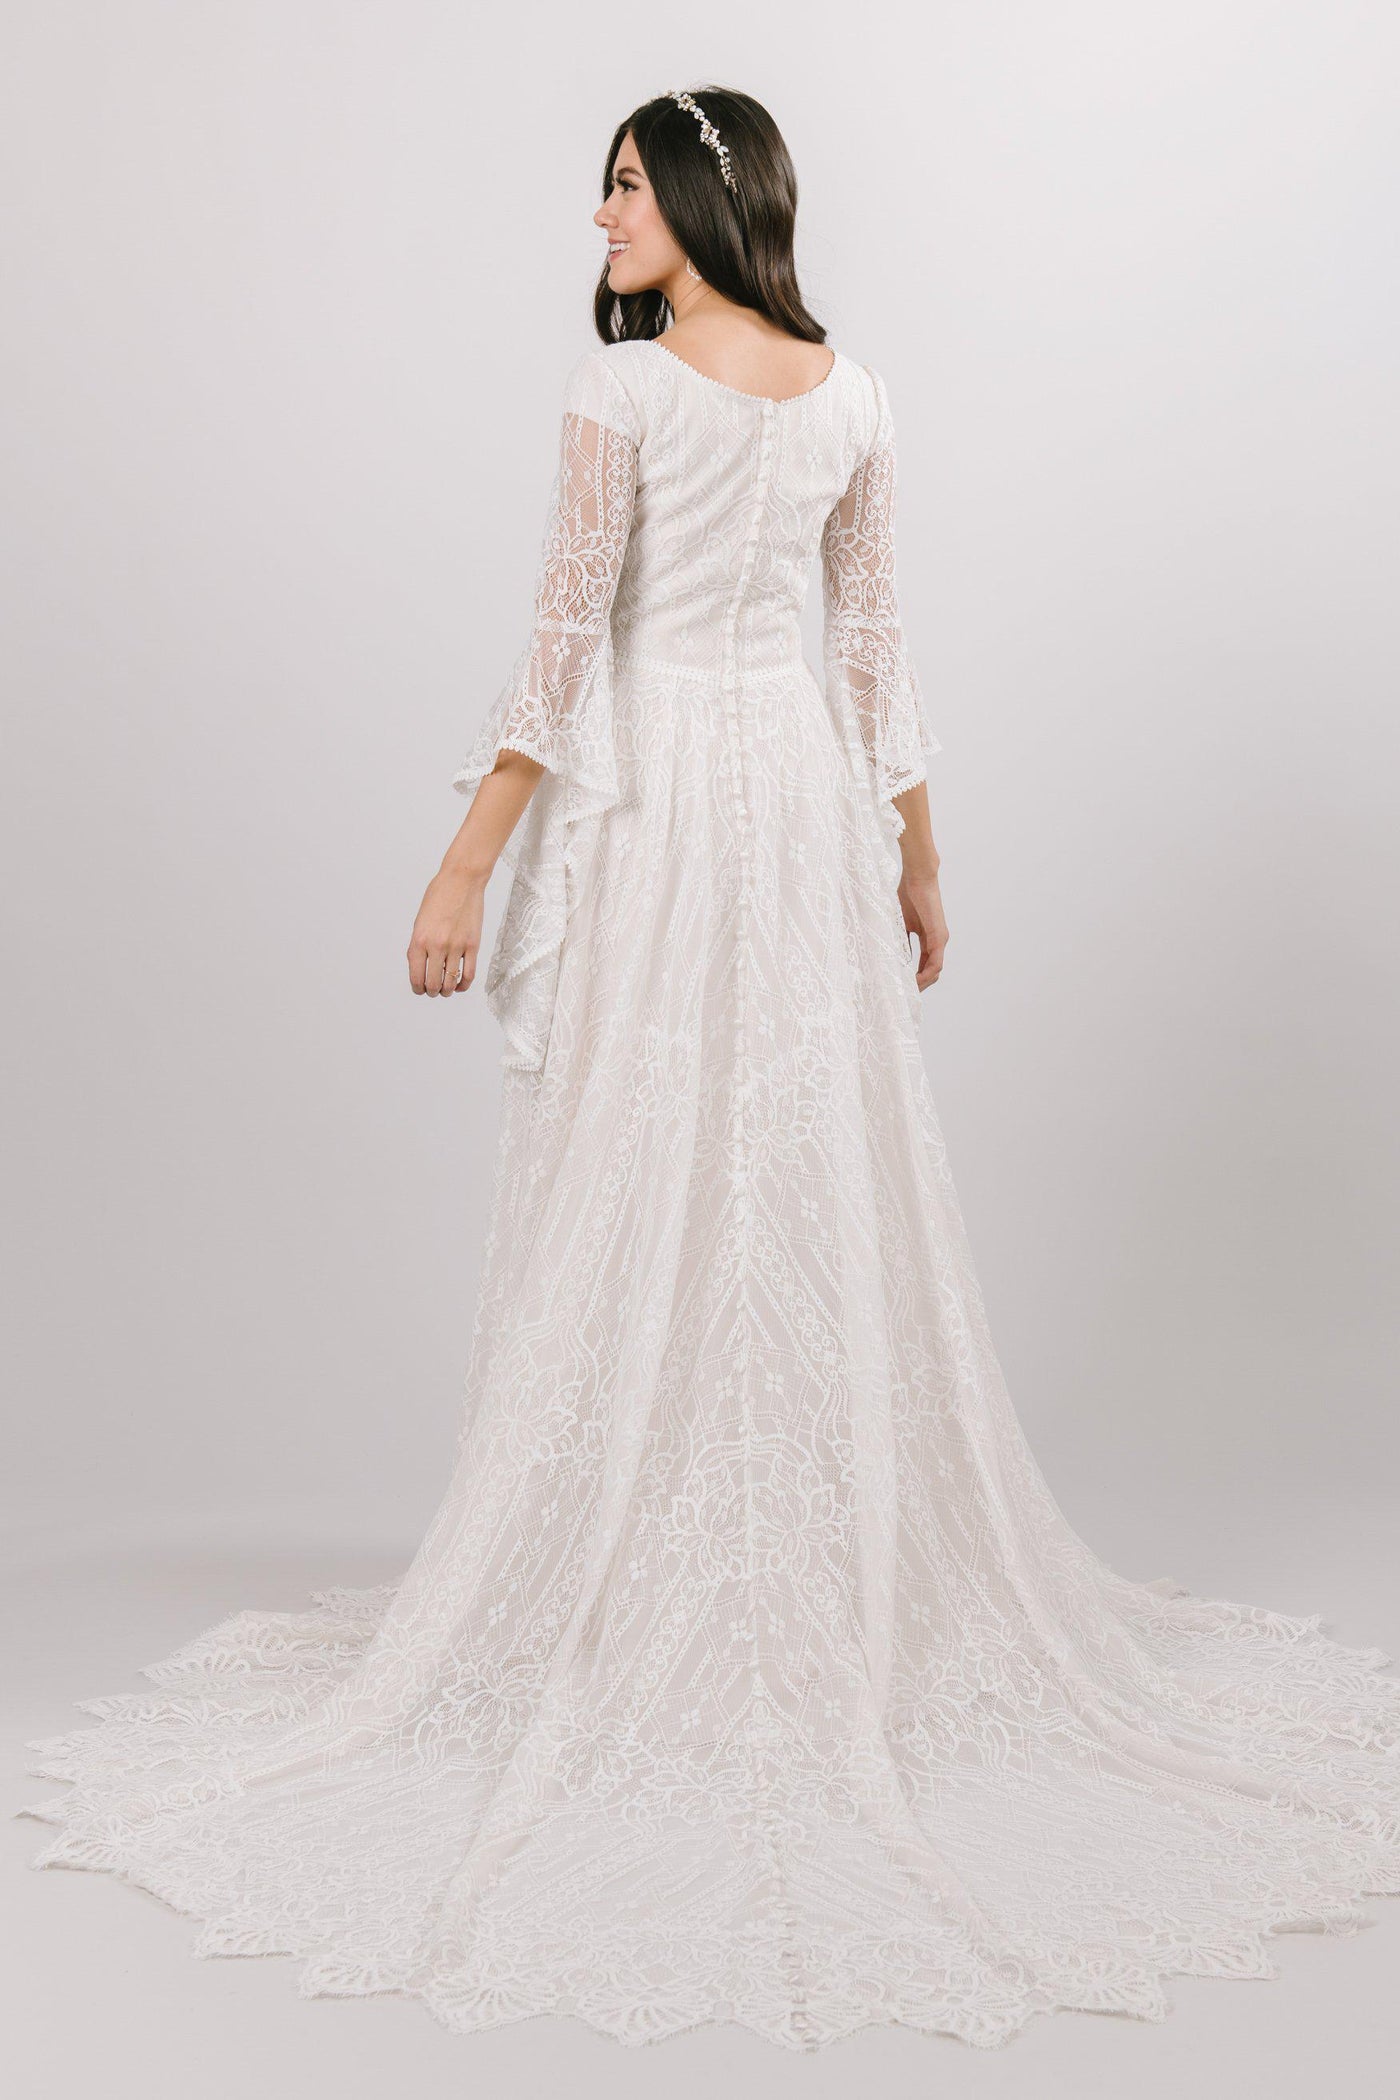 modest wedding dress Soft a-line laced dress with quarterly length flowing sleeves from salt lake city utah bridal shop